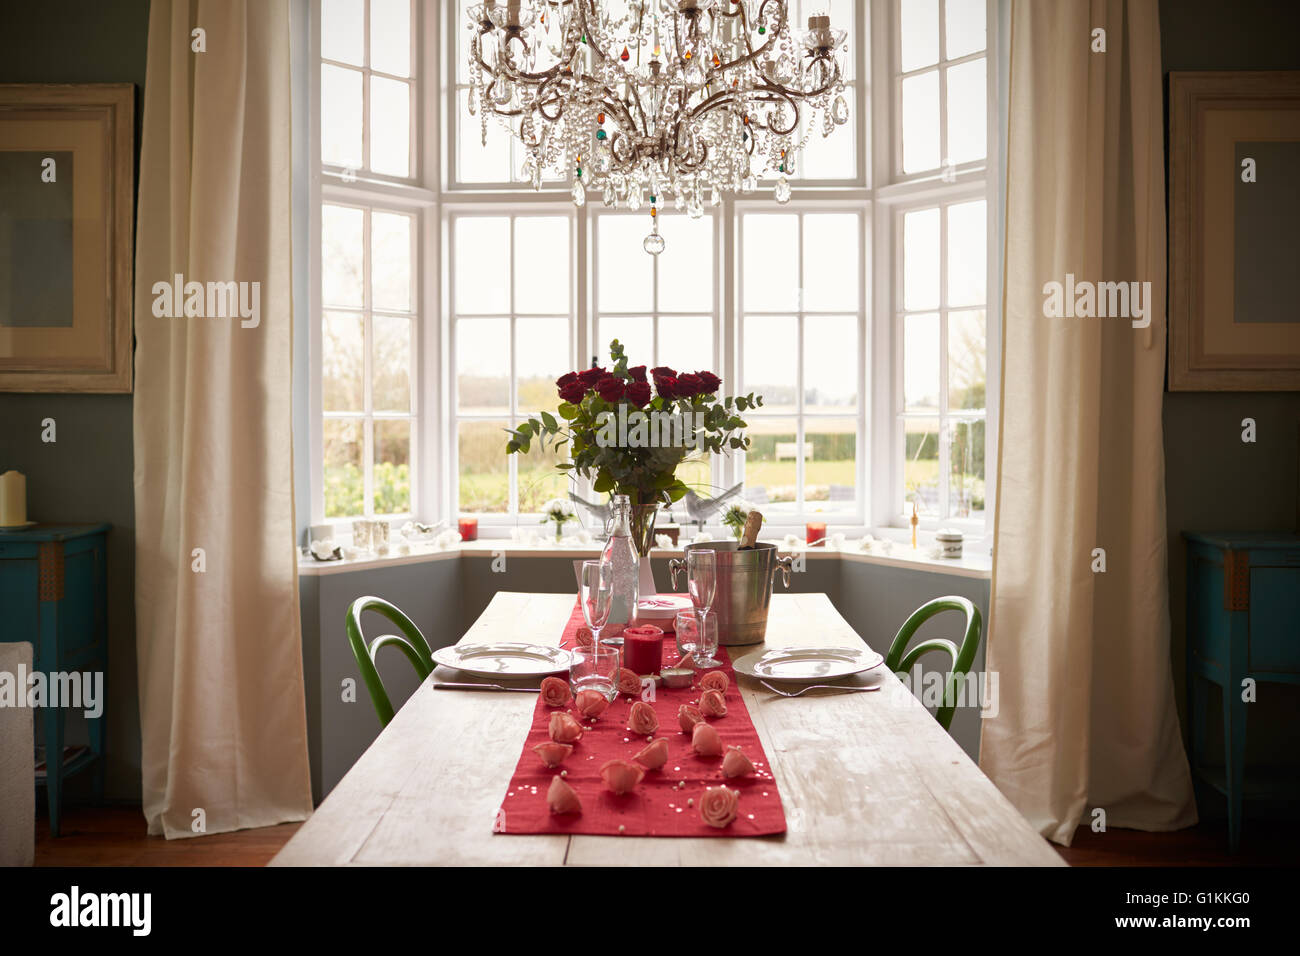 Table Setting For Romantic Valentines Day Meal Stock Photo